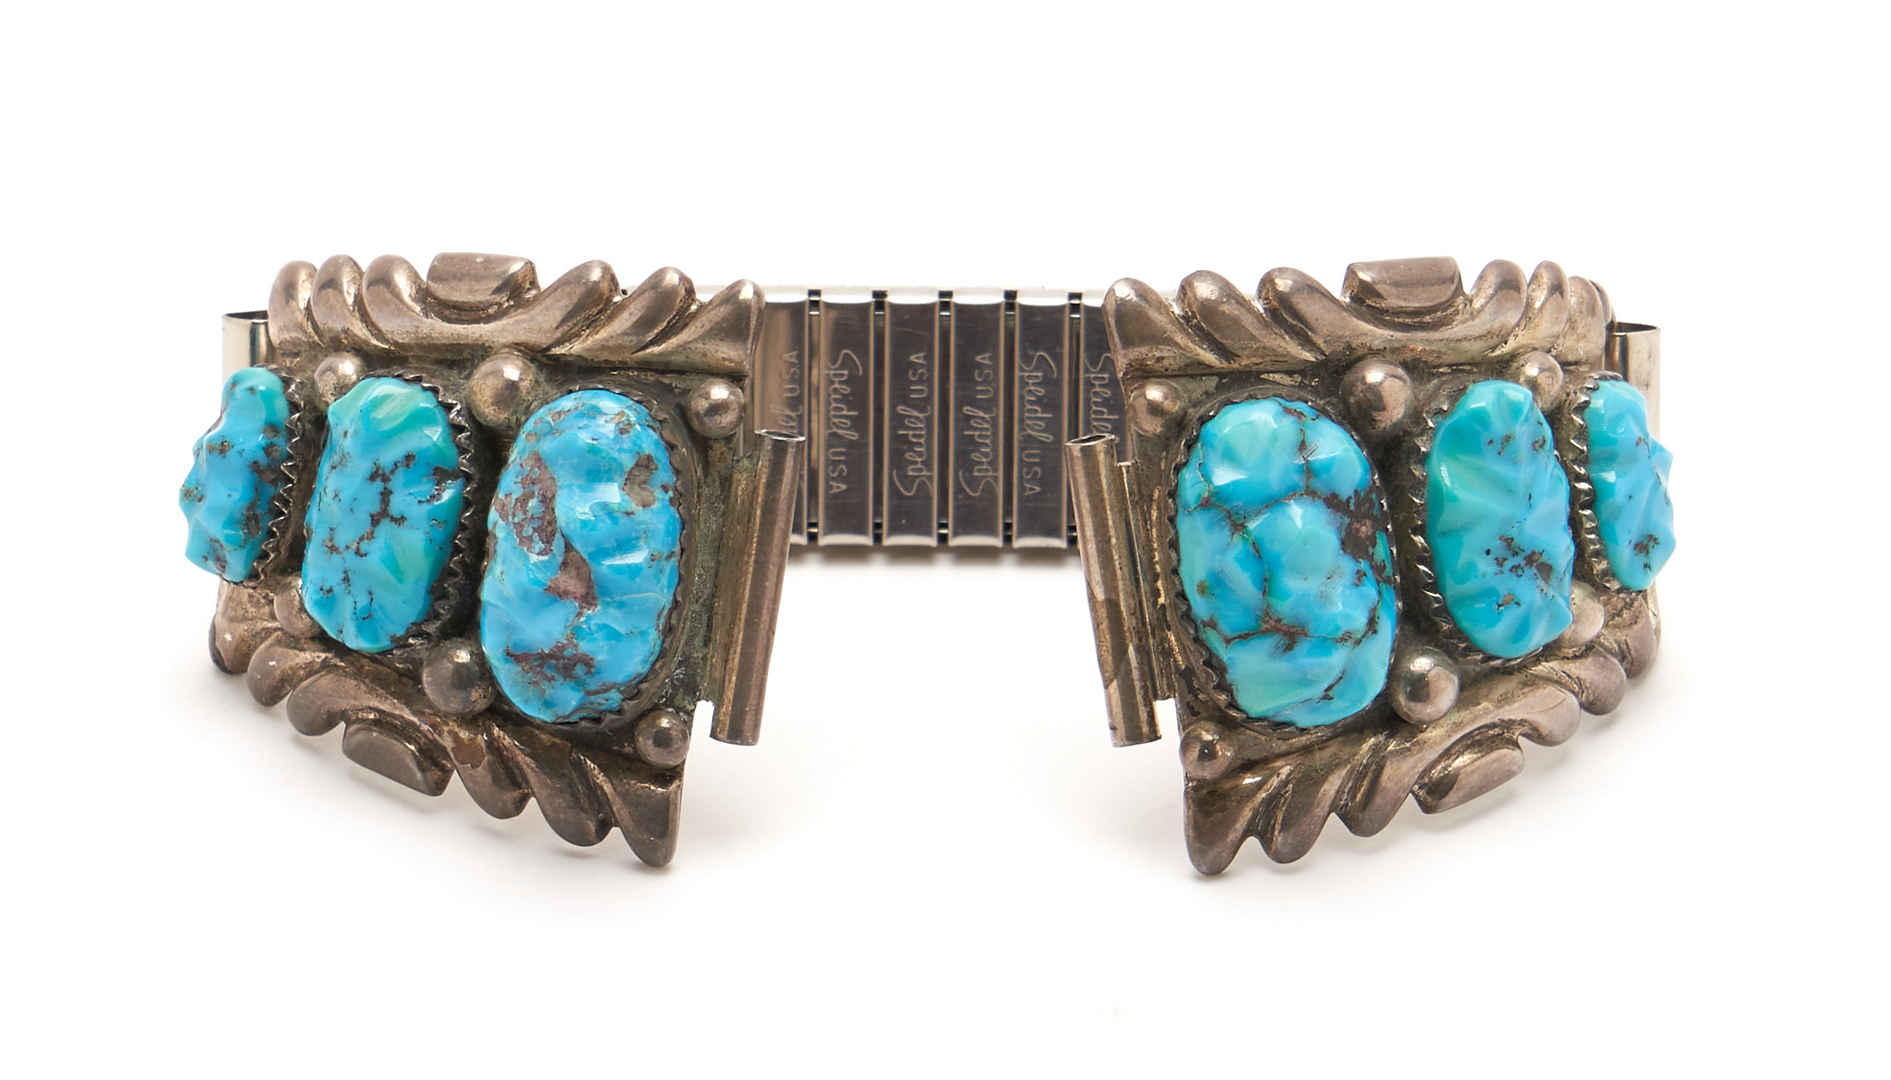 Lot 647: 5 Native American Silver & Turquoise Jewelry Items